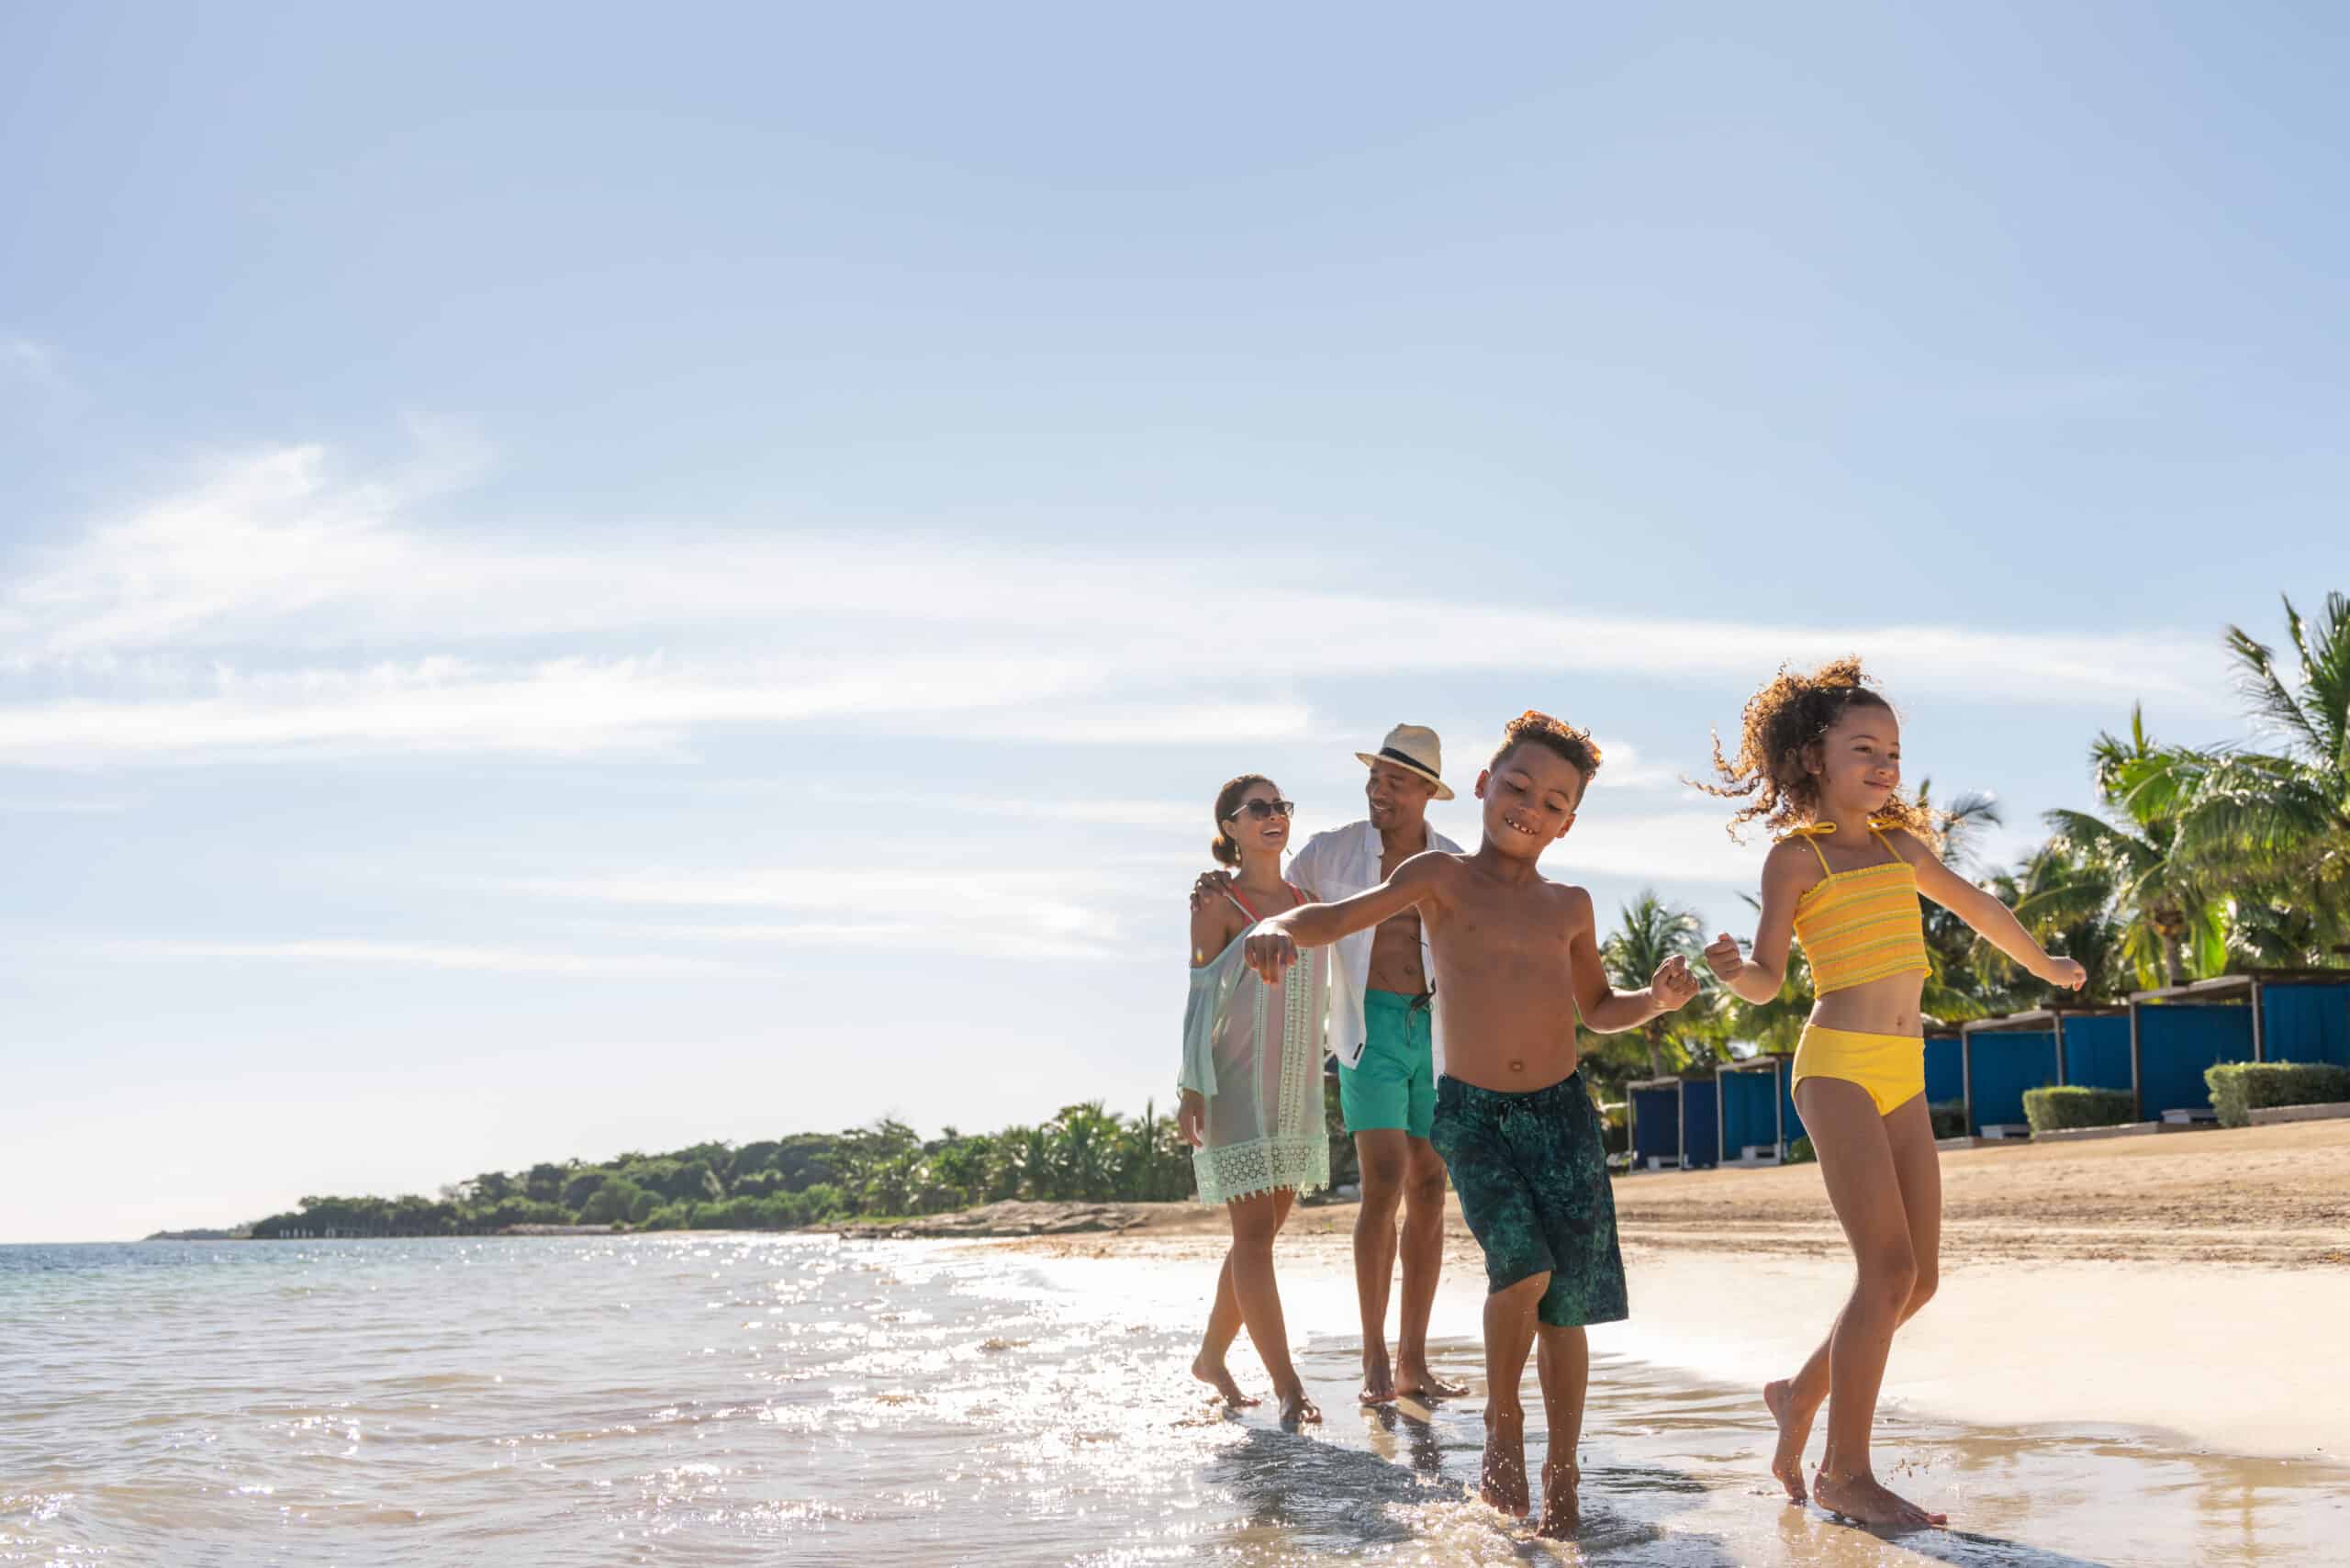 <p>Based on an analysis of the millions of reviews left on Tripadvisor for beaches globally over one year, this list reveals the beaches that were the highest-rated by real people who recently visited.</p> <p>“As our Travelers’ Choice lists reveal, there’s no one-size-fits-all beach day. The top three beaches are all in Europe, ousting the perennially popular Caribbean from those spots—a sign that some travelers are eager to swap typical resort vacations for the coastlines of Portugal, Italy, and beyond,” shares Sarah Firshein, Head of Editorial at Tripadvisor.</p>